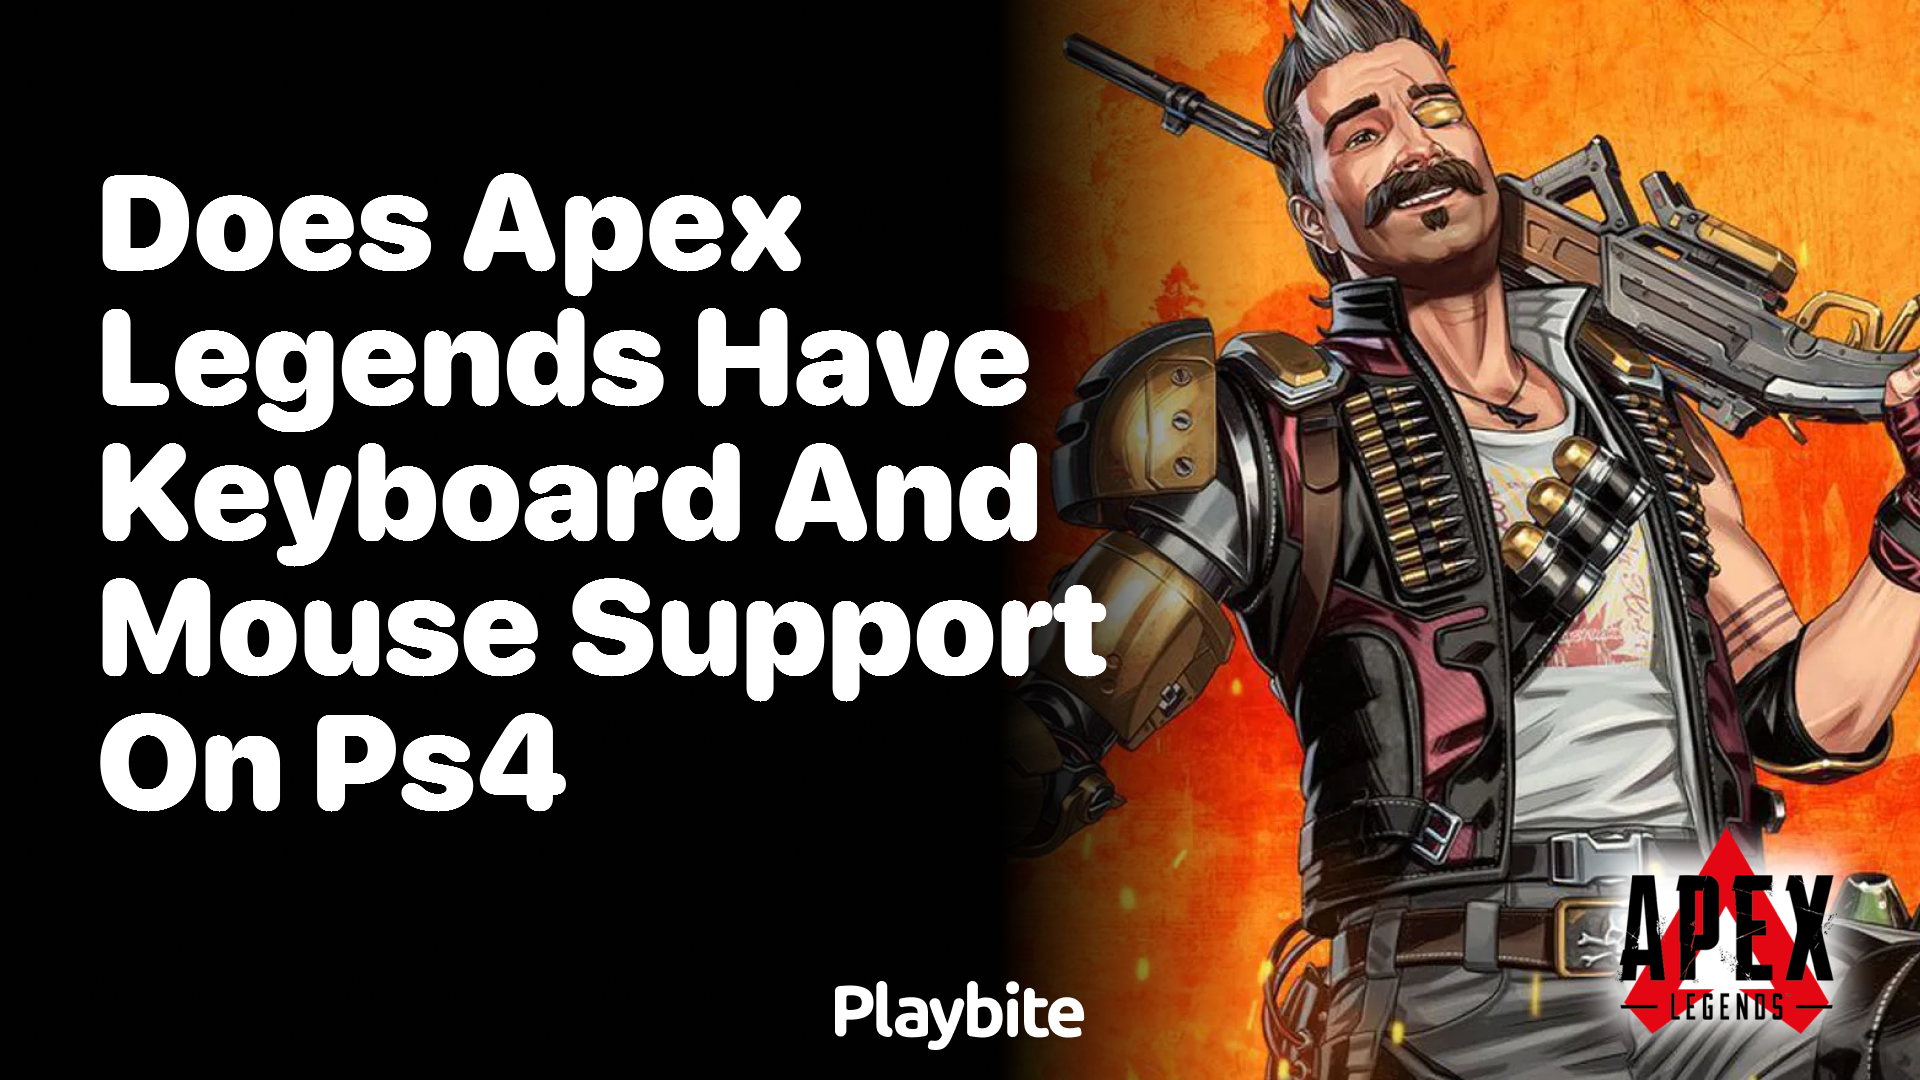 Does Apex Legends have keyboard and mouse support on PS4?